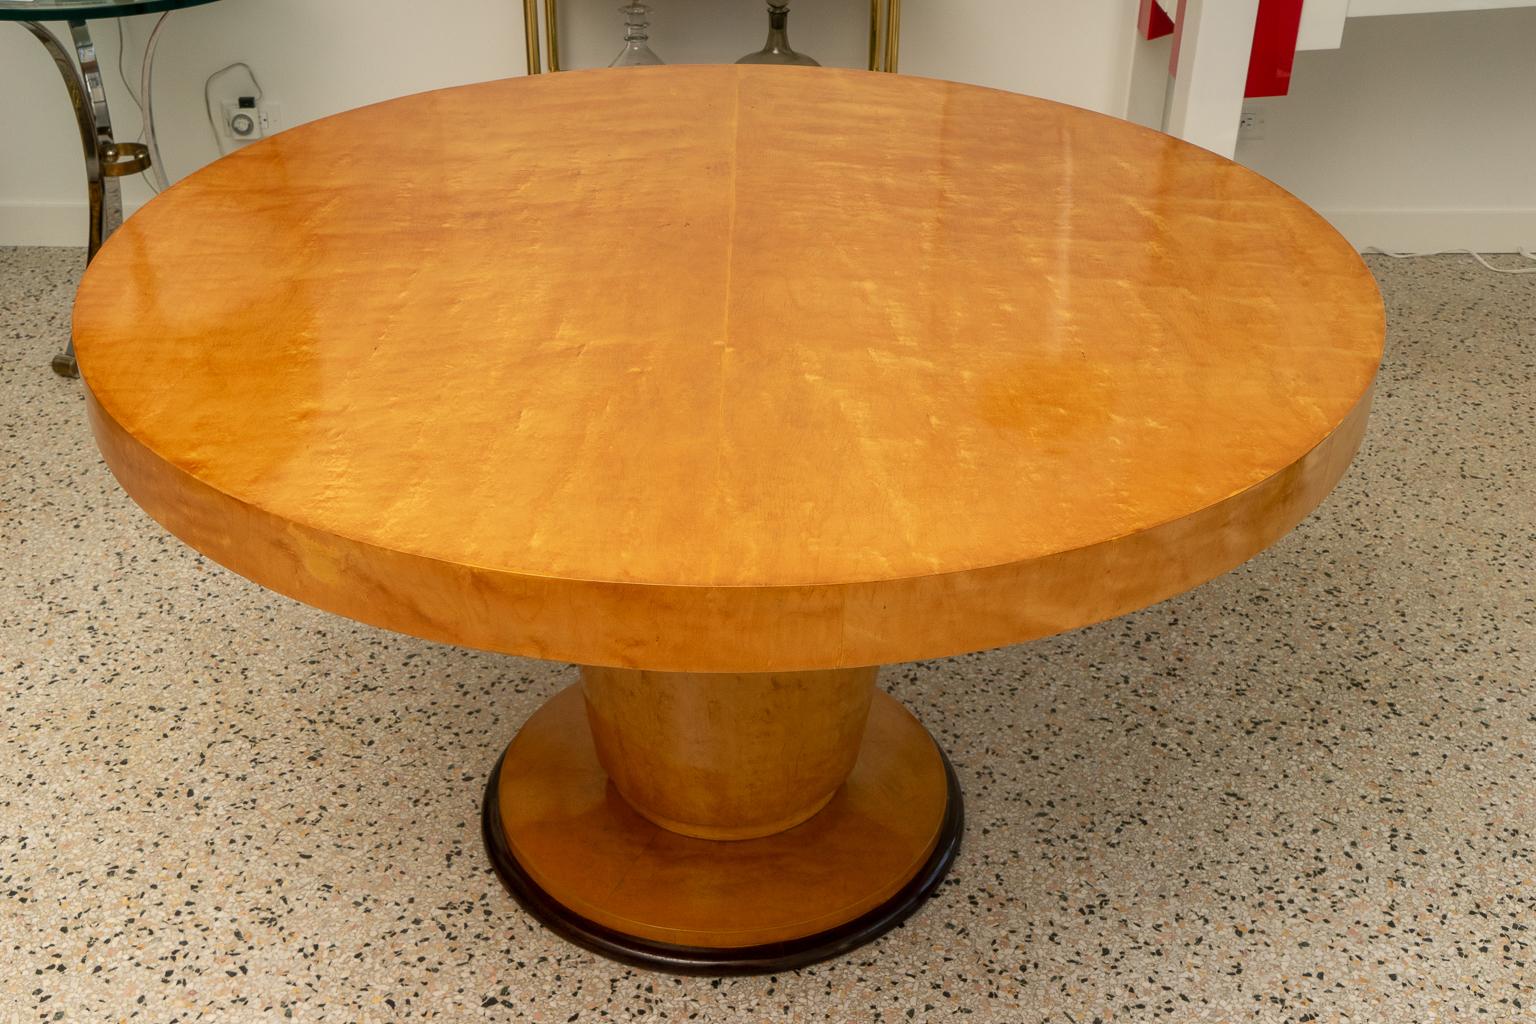 This stylish and chic French Art Deco center table was acquired from a Palm Beach estate and it dates to the 1930s-1940s. The piece is fabricated with sycamore wood veneers in a warm, golden coloration with a dark brown accent color on the pedestal